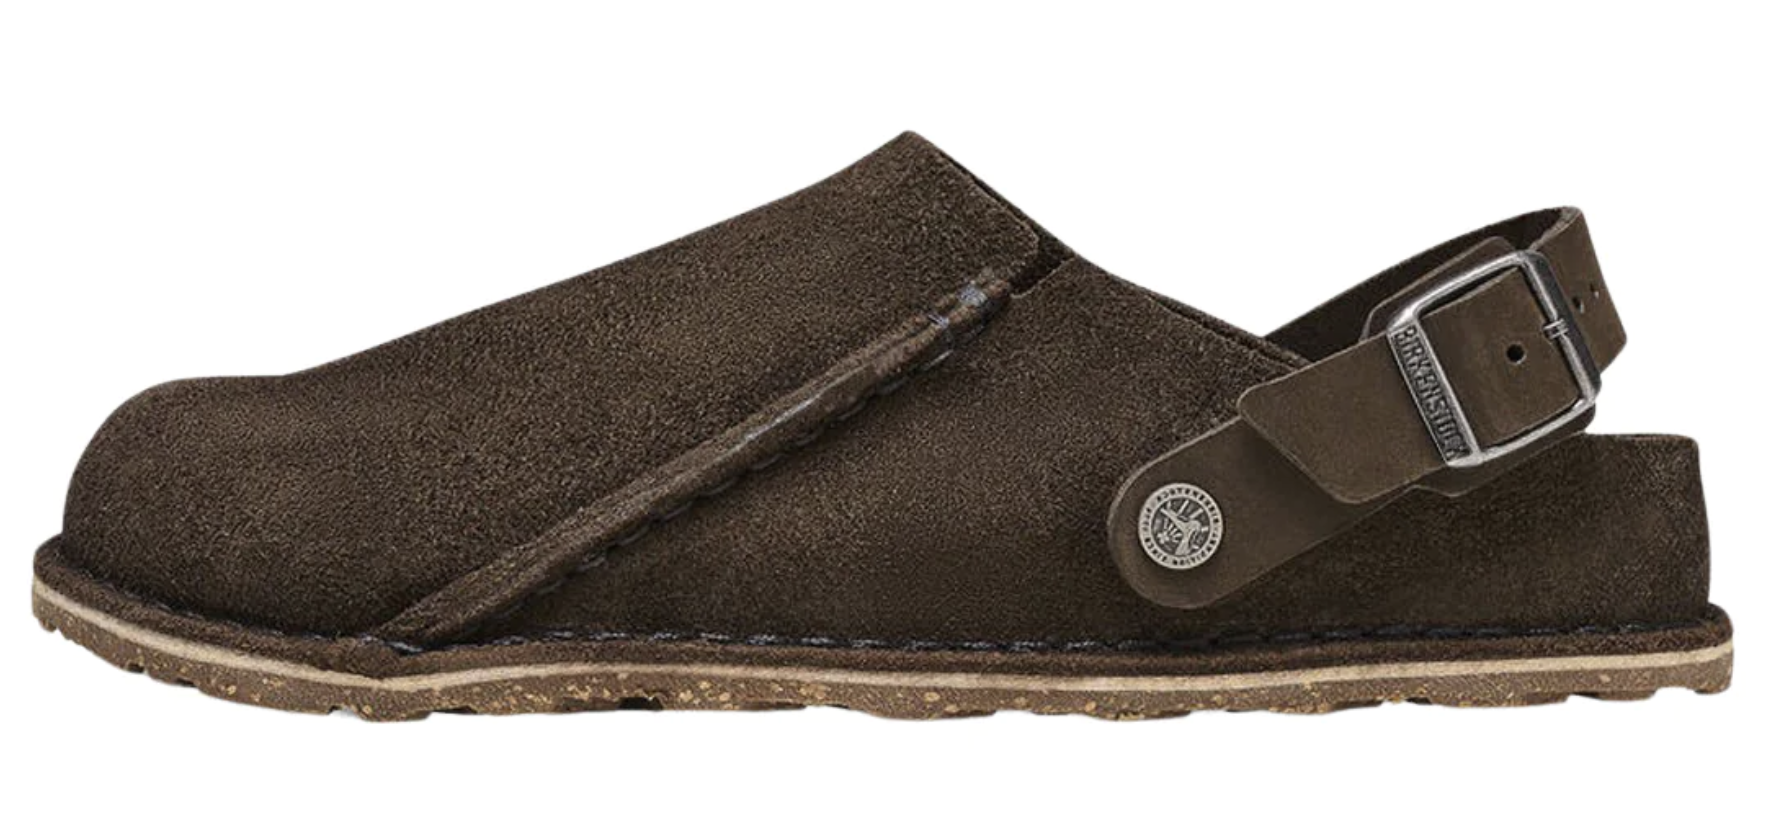 Birkenstock Lutry Premium Suede Leather Clogs Mules adult Slippers